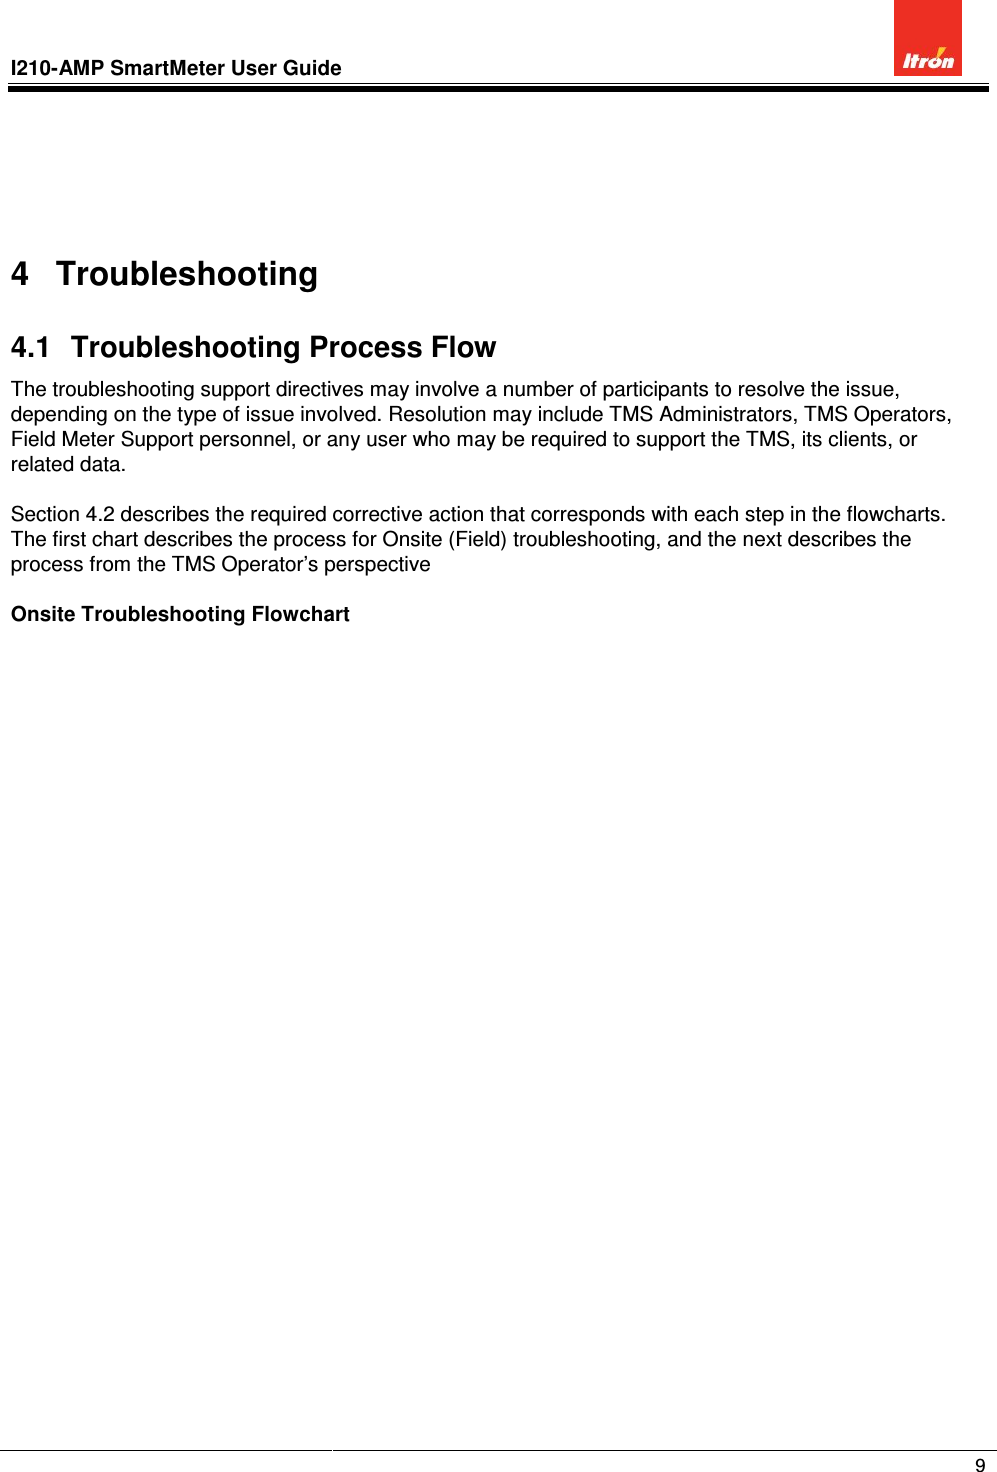 I210-AMP SmartMeter User Guide               9      4  Troubleshooting 4.1  Troubleshooting Process Flow The troubleshooting support directives may involve a number of participants to resolve the issue, depending on the type of issue involved. Resolution may include TMS Administrators, TMS Operators, Field Meter Support personnel, or any user who may be required to support the TMS, its clients, or related data.  Section 4.2 describes the required corrective action that corresponds with each step in the flowcharts.  The first chart describes the process for Onsite (Field) troubleshooting, and the next describes the process from the TMS Operator’s perspective  Onsite Troubleshooting Flowchart 